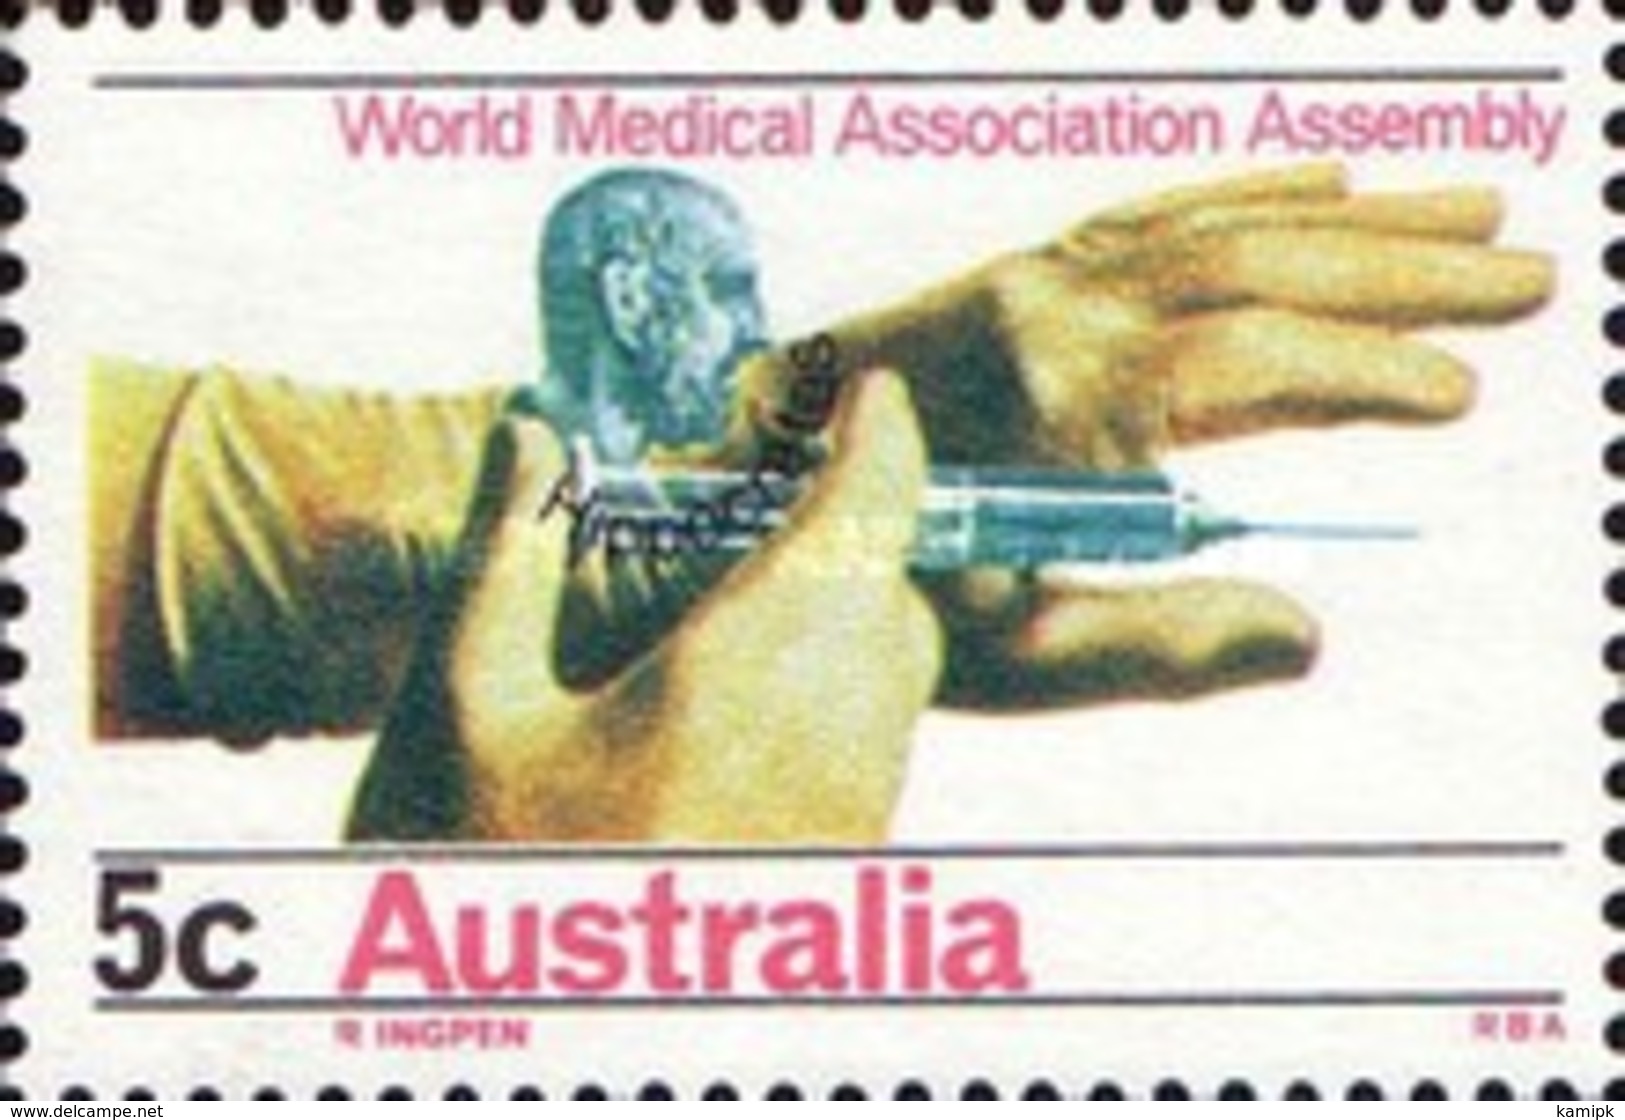 USED STAMPS Australia - World Medical Association Assembly - Syd  -1968 - Used Stamps